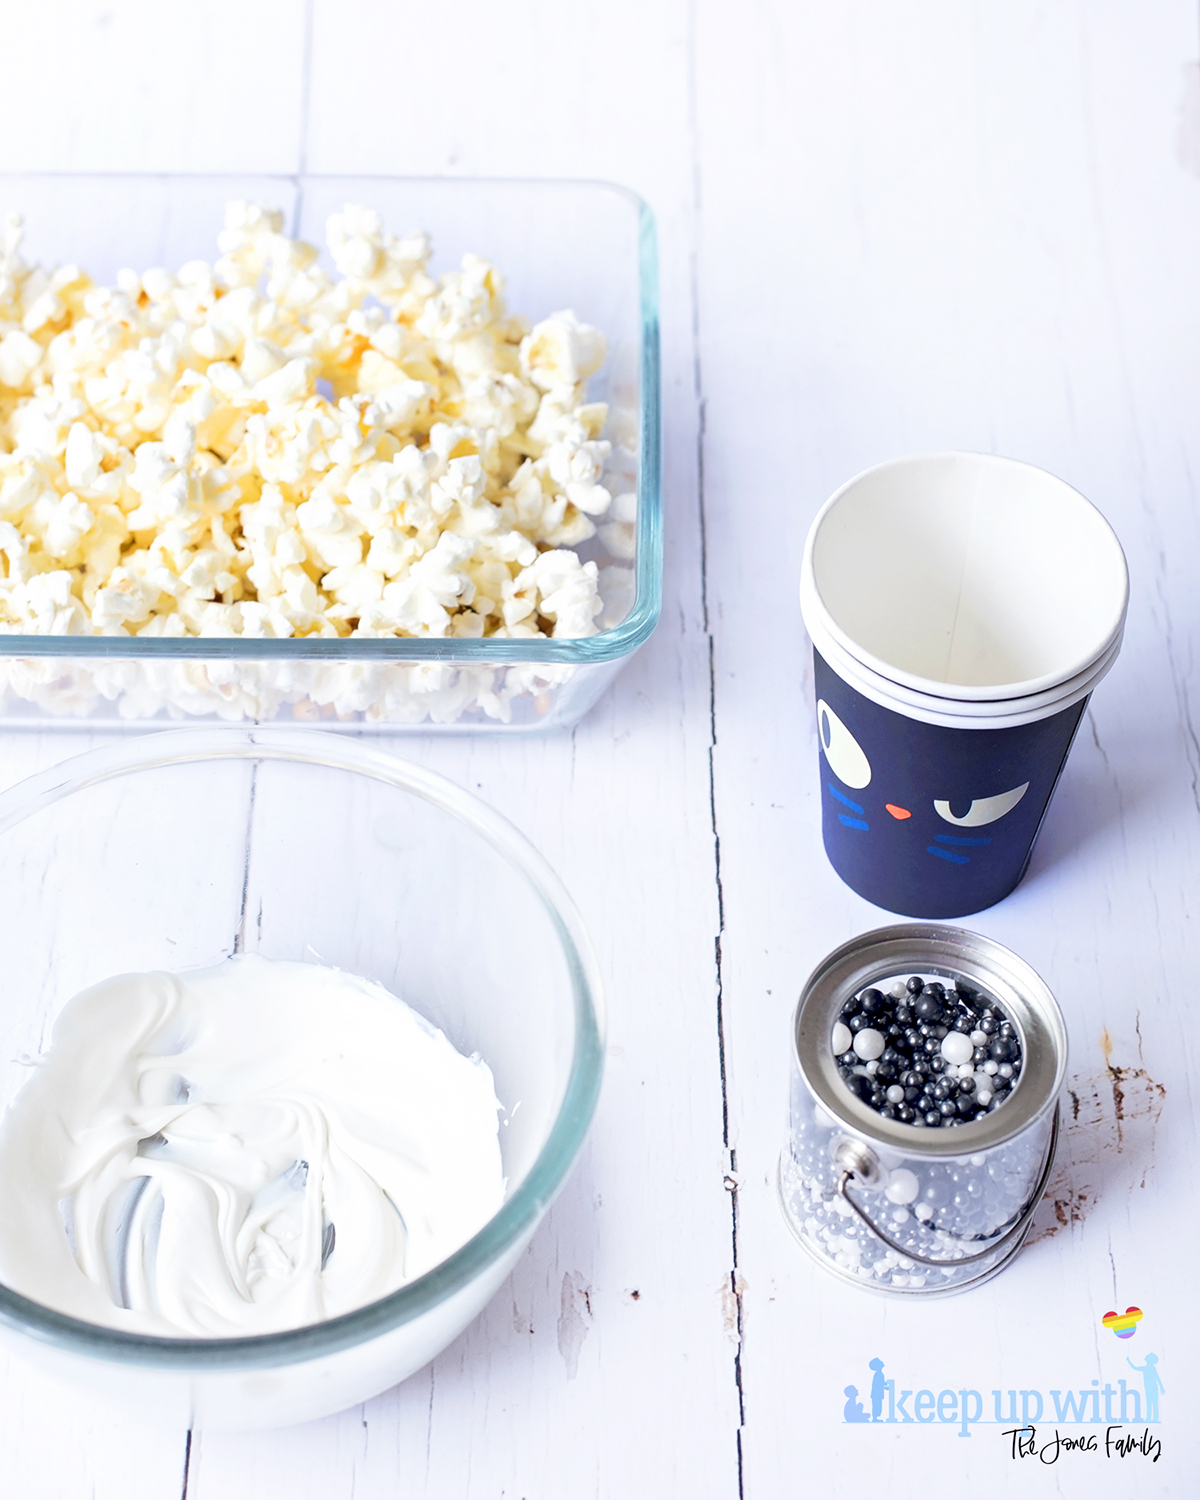 Image shows the ingredients needed to make hocus pocus popcorn. Image by keep up with the jones family.